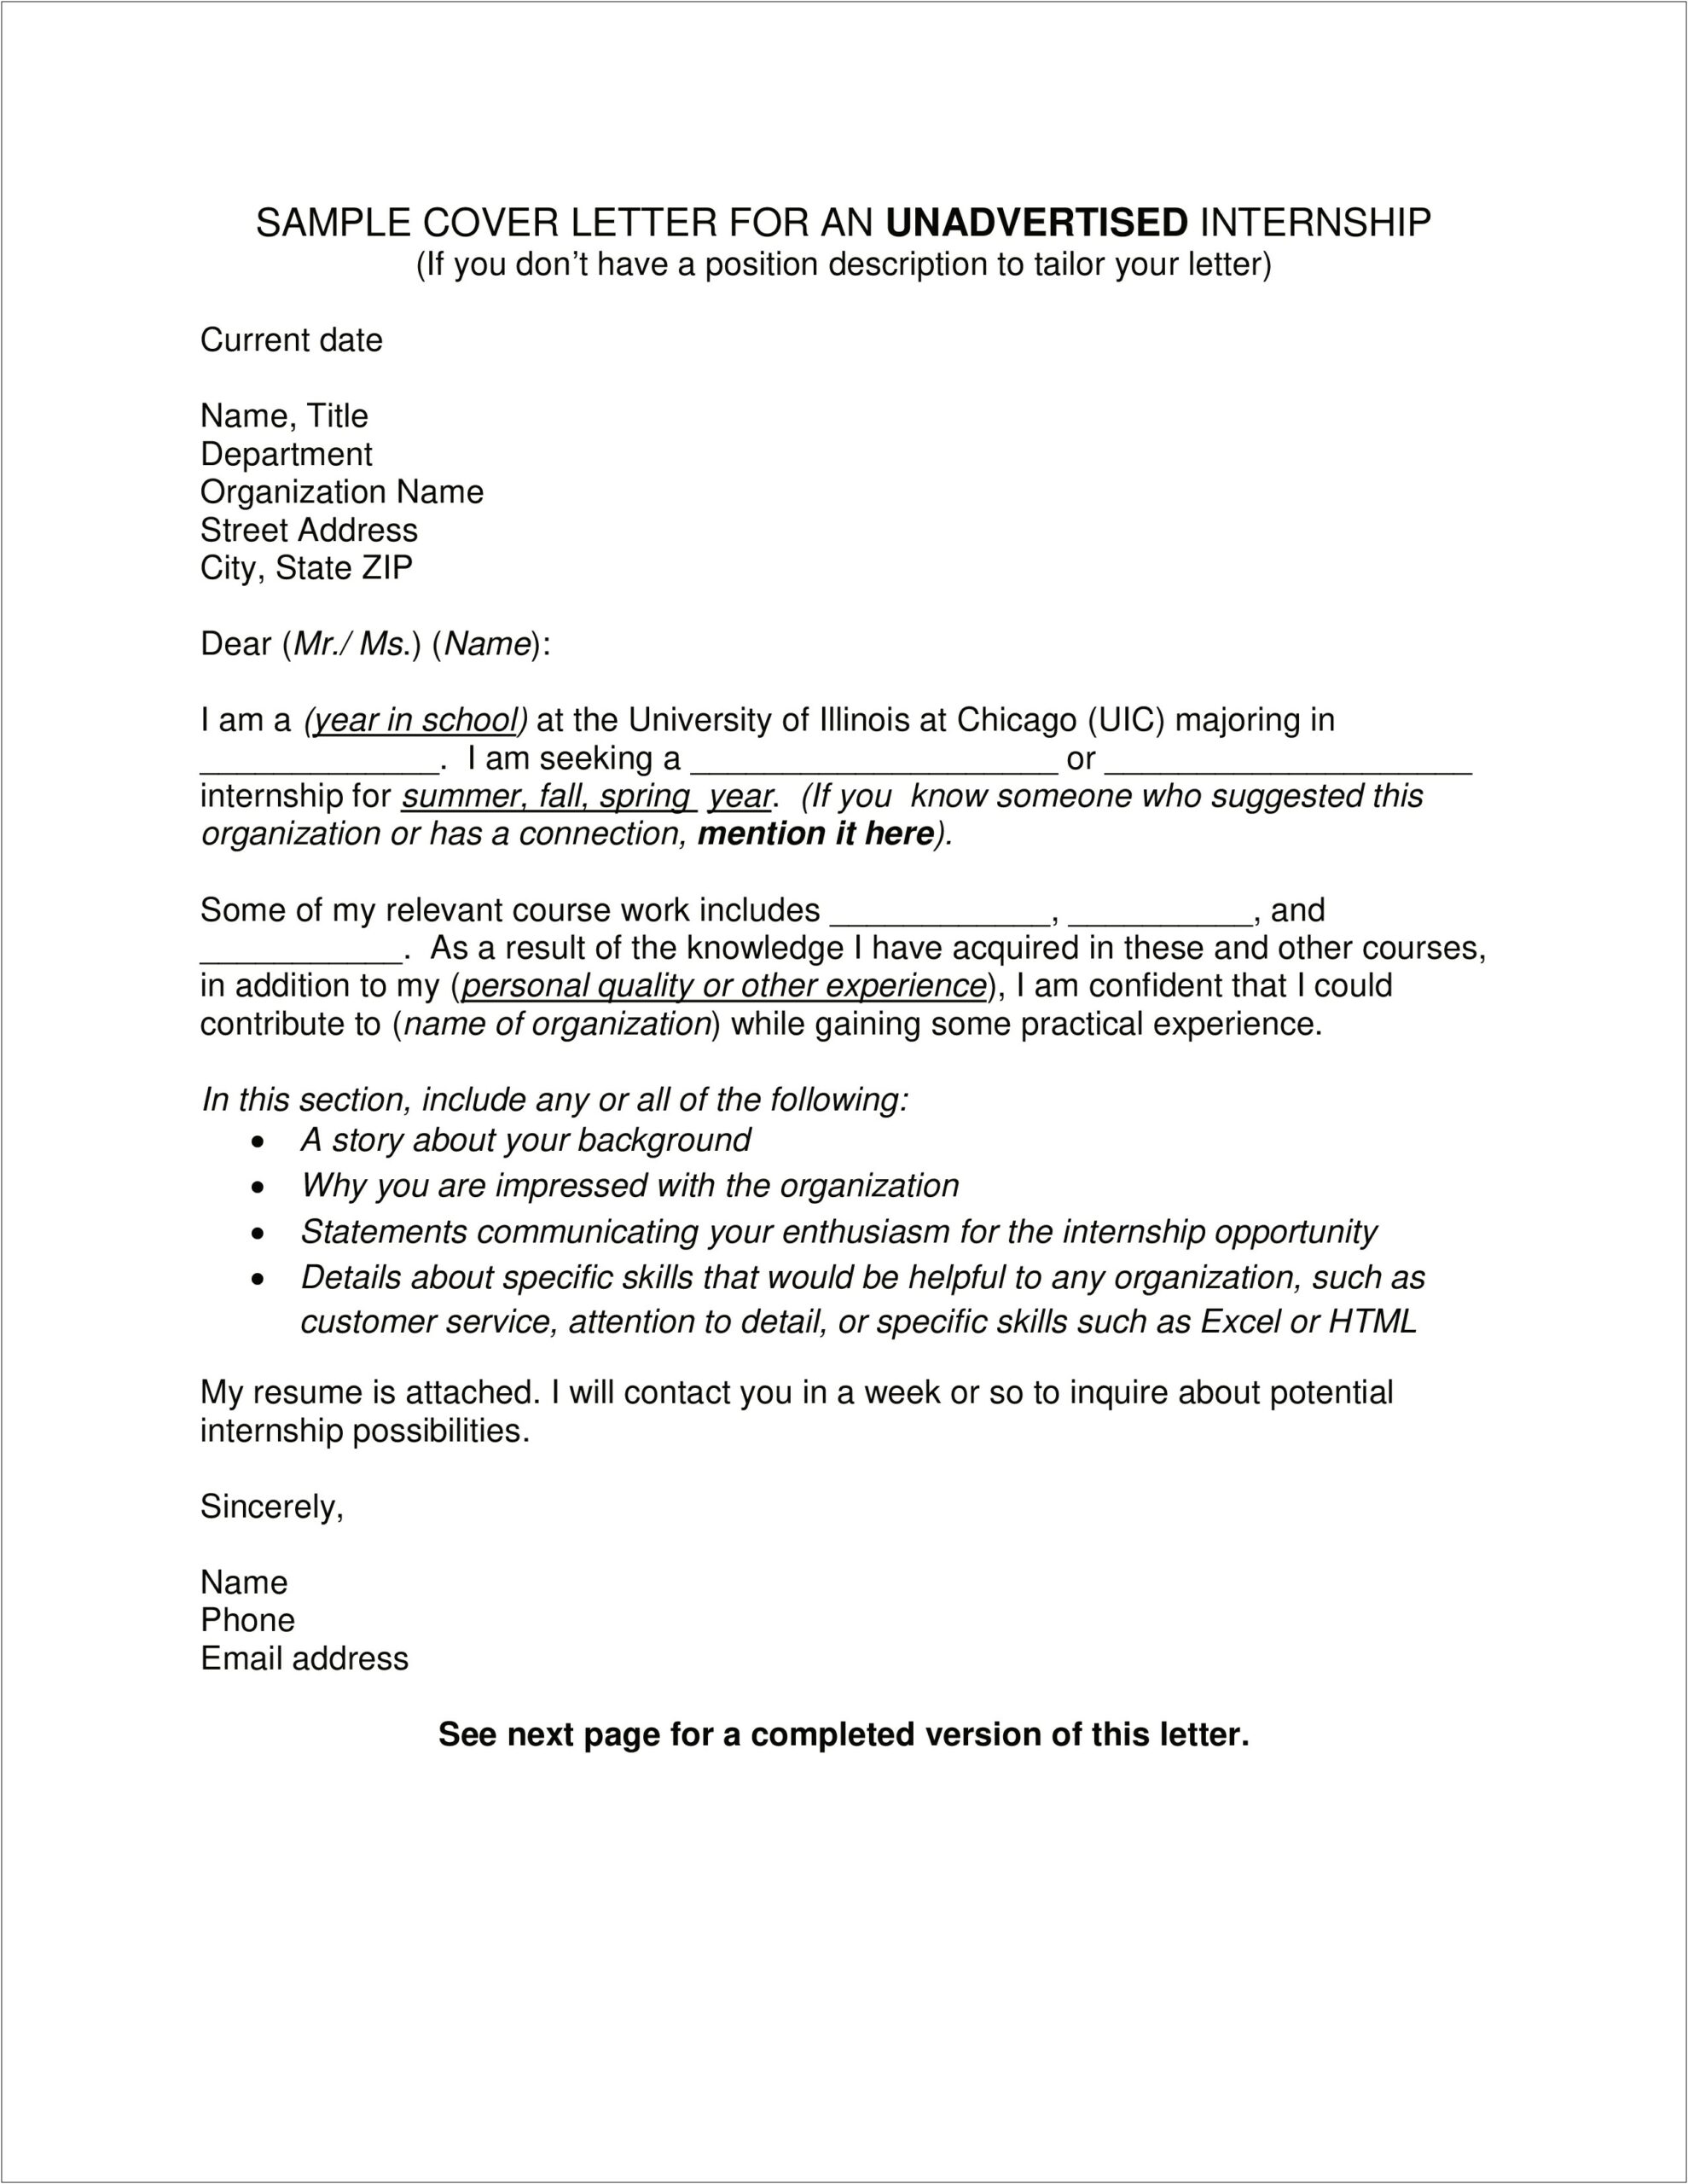 Sample Email To Potential Employer With Resume Attached